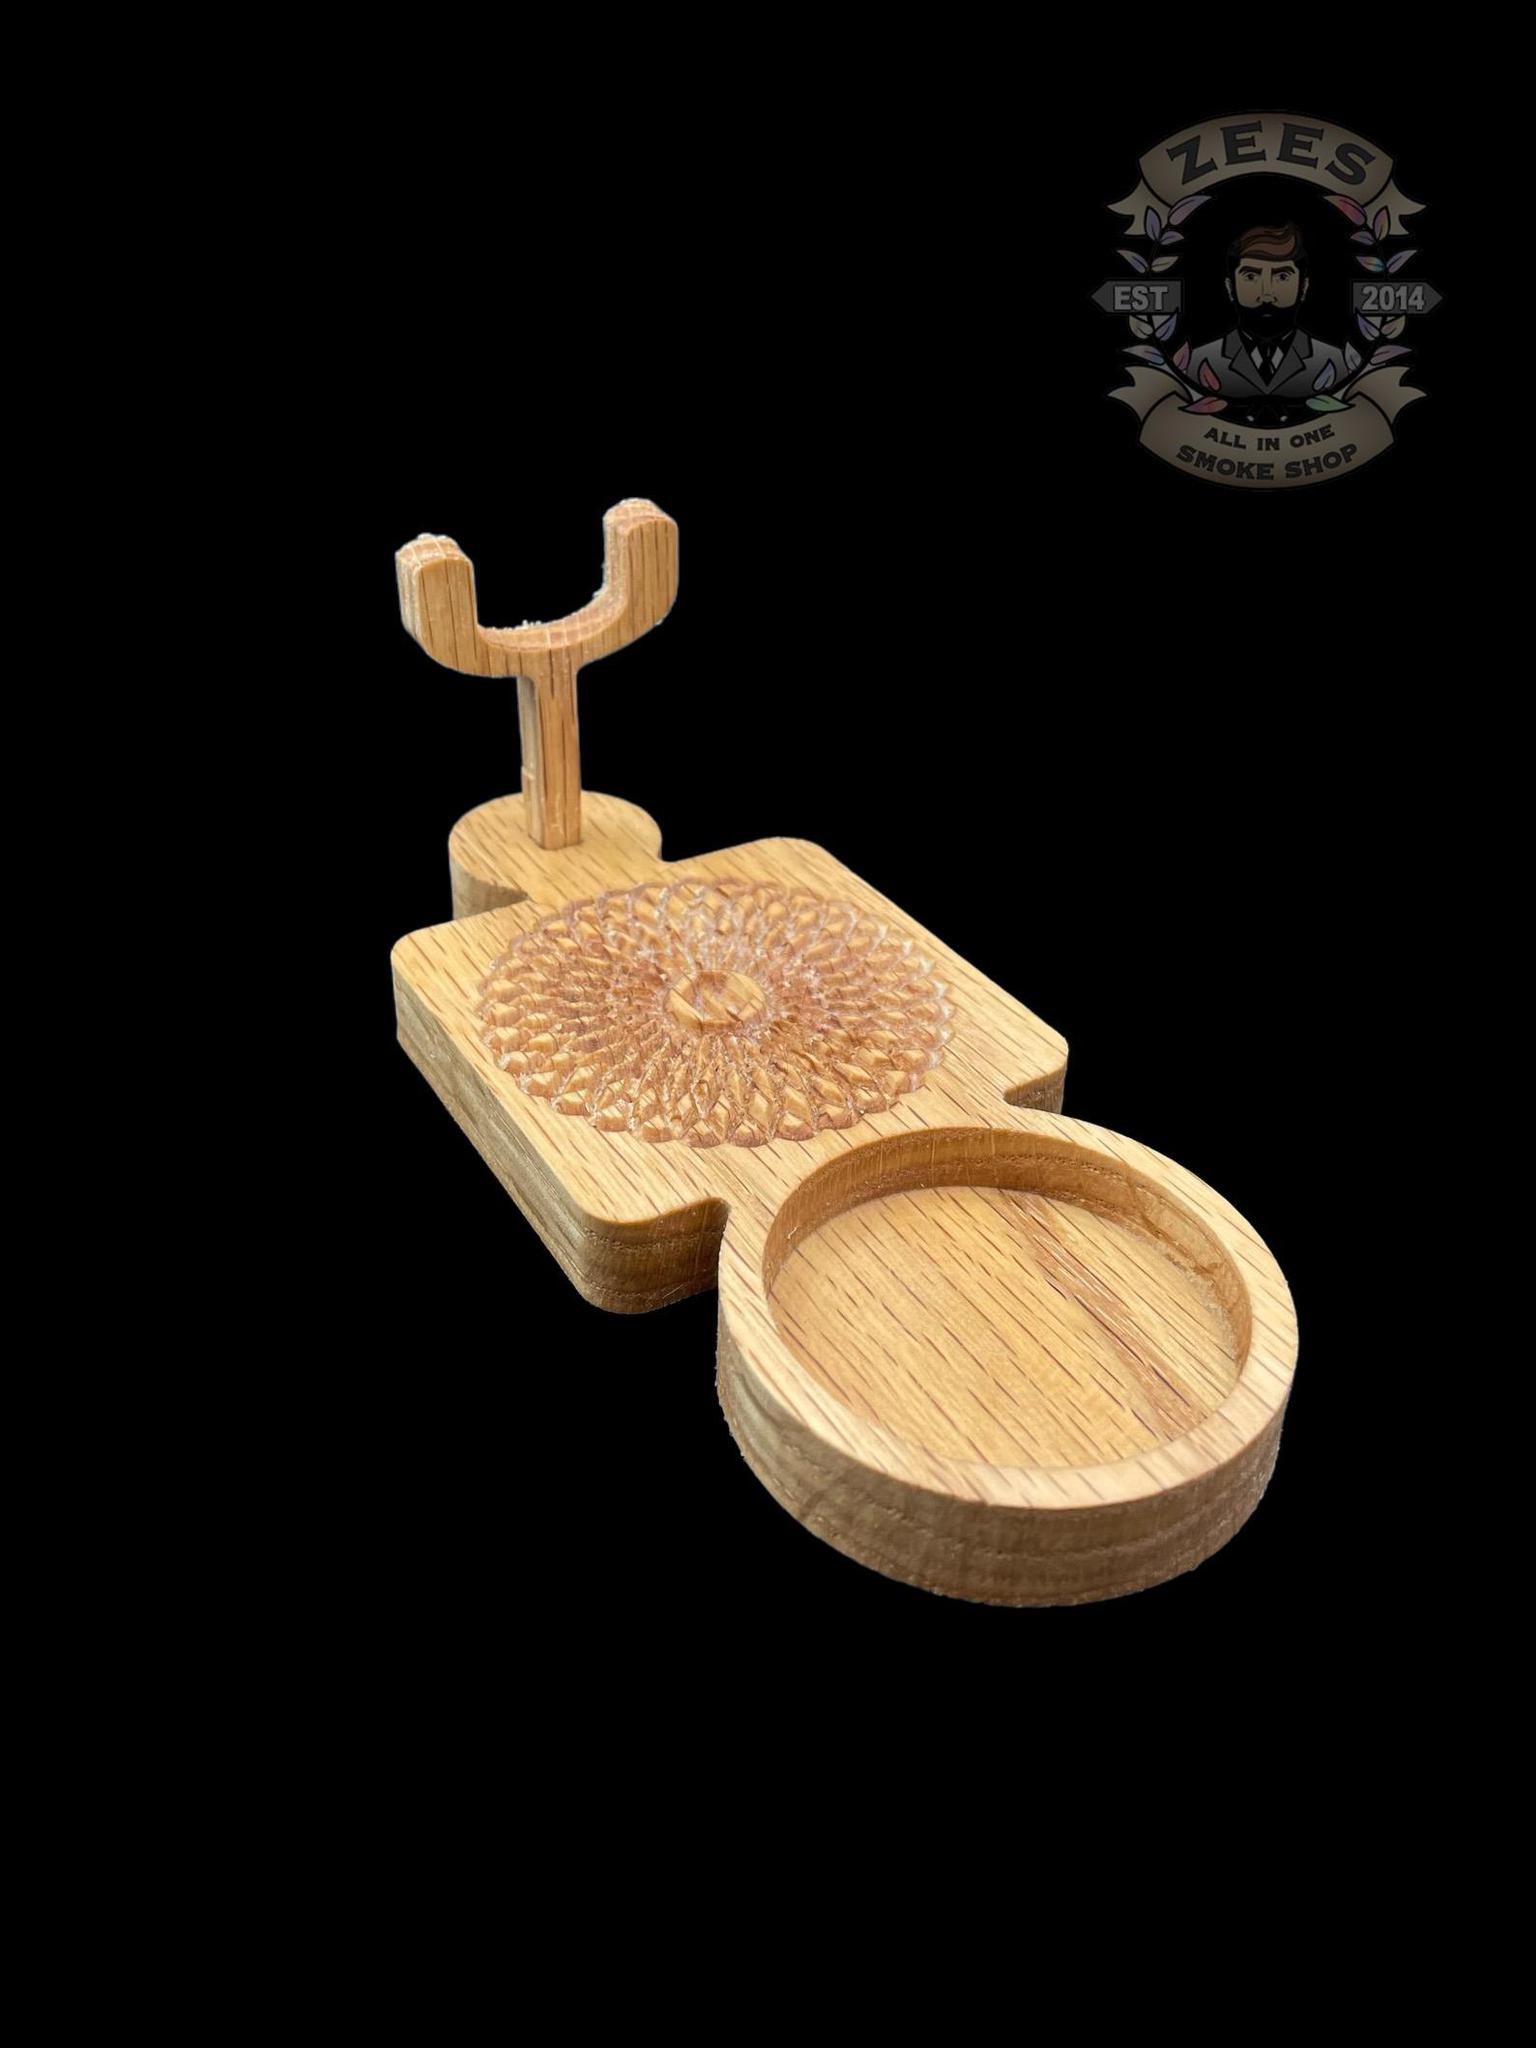 CARVED POURS: WOODEN HEXAGON DAB RITE BASE – ALL IN ONE SMOKE SHOP